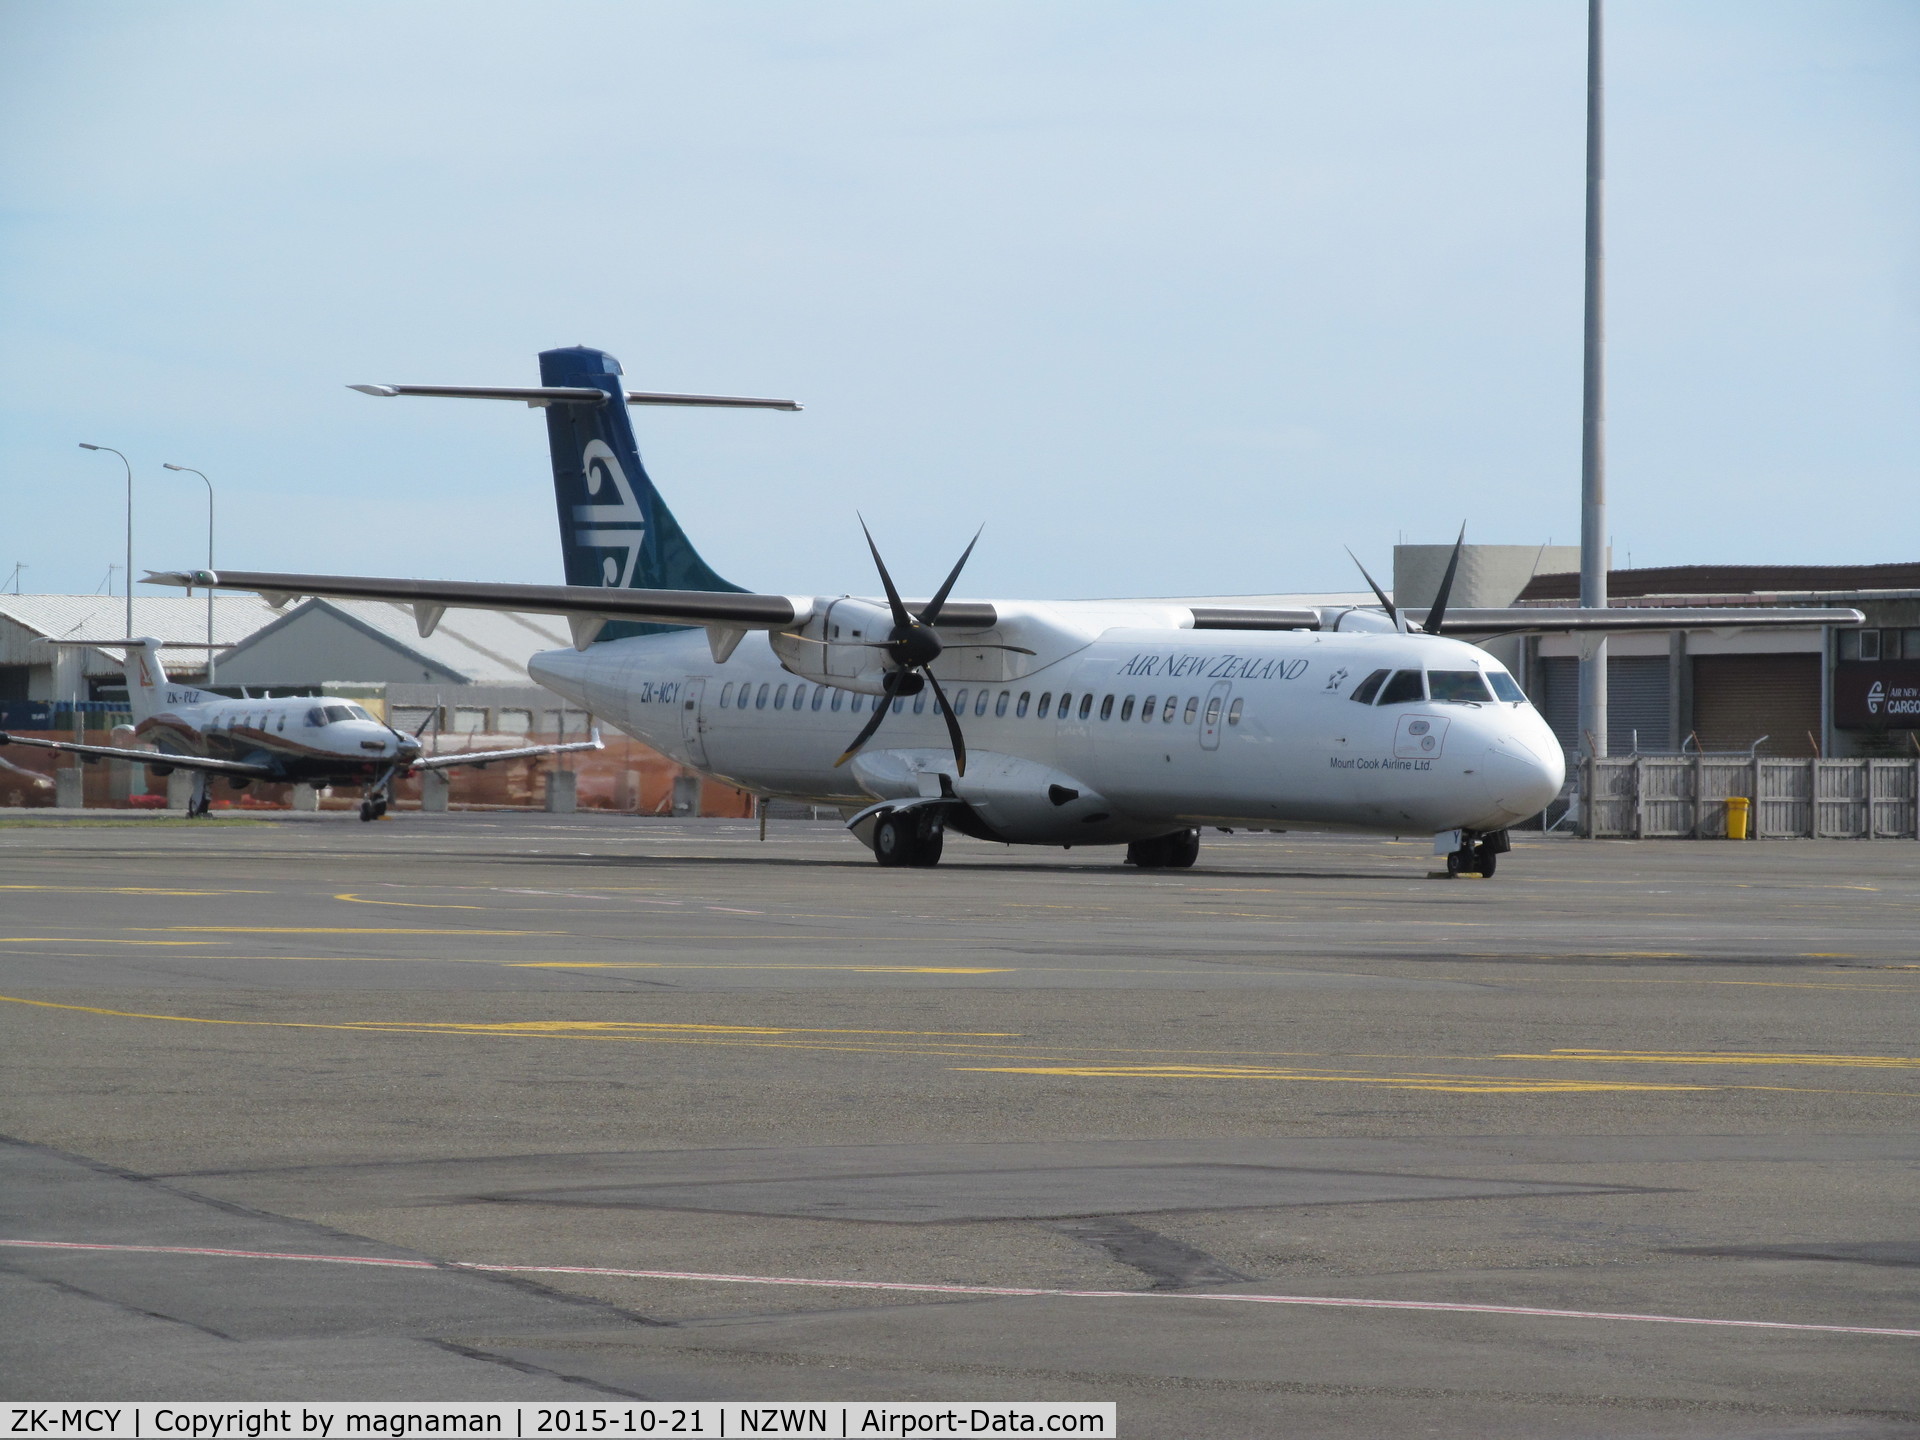 ZK-MCY, 2003 ATR 72-212A C/N 703, on prop apron at middle earth